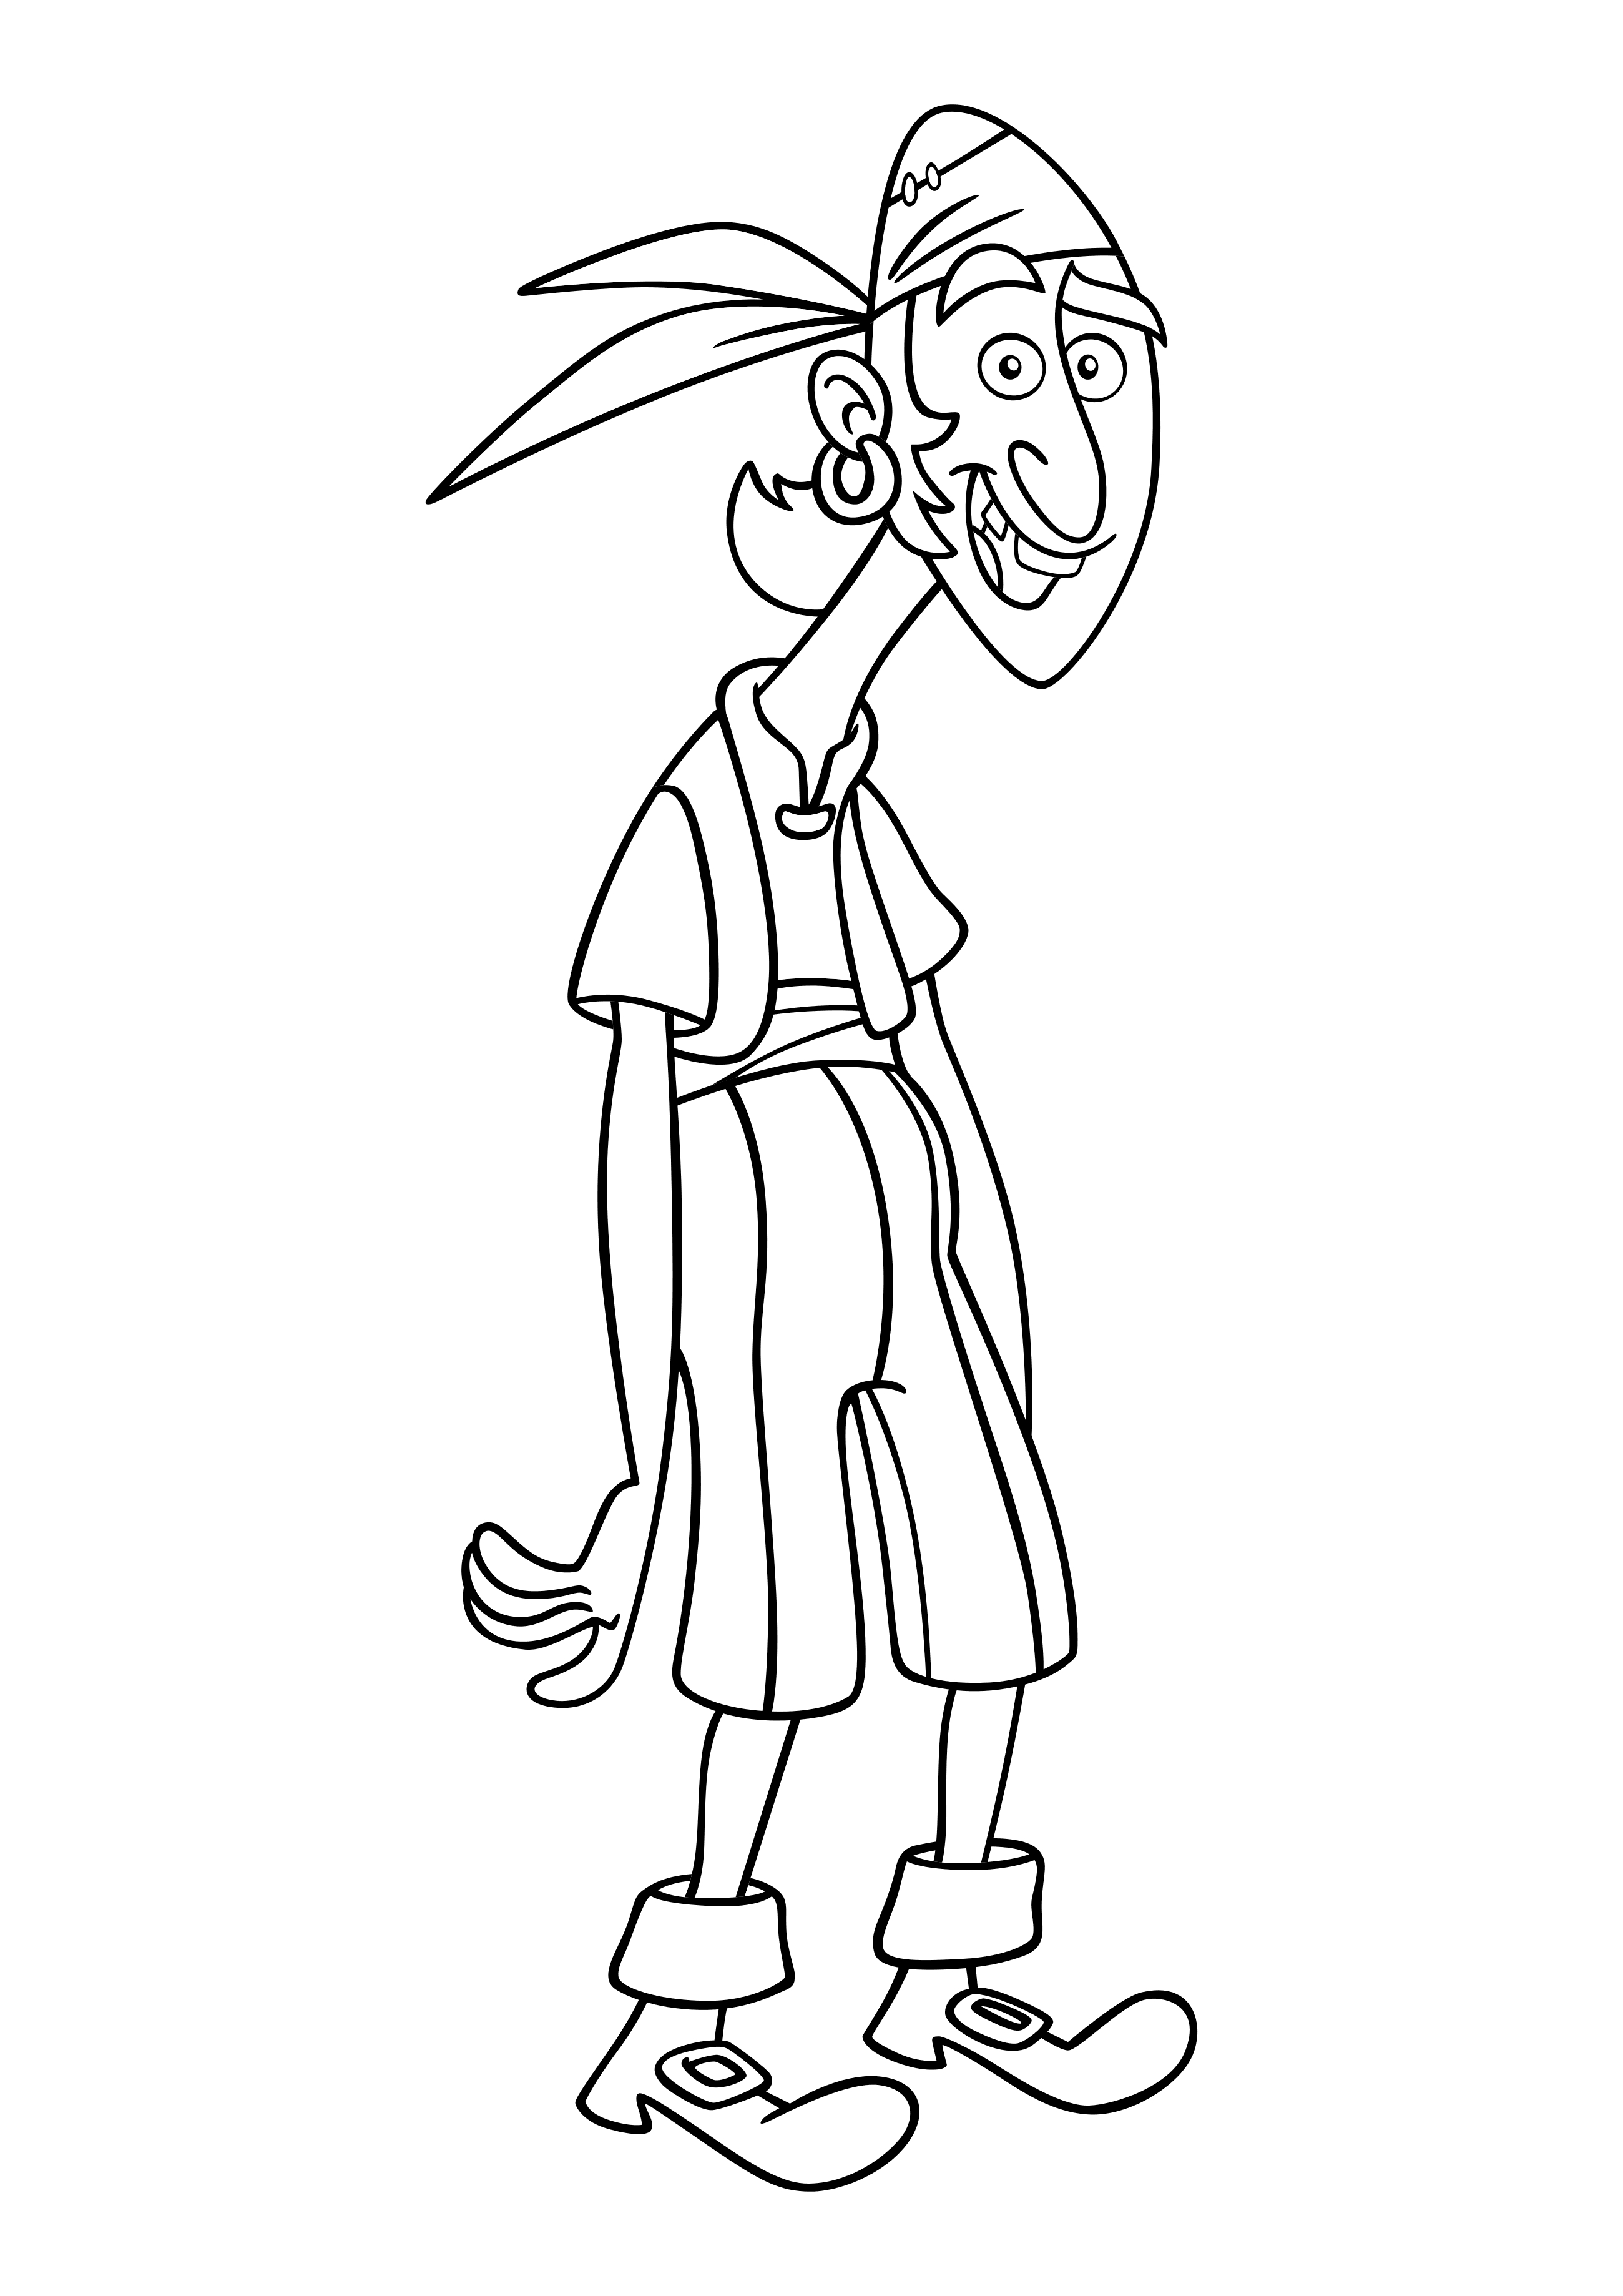 Coloring page Jake and the Never Land Pirates Bones